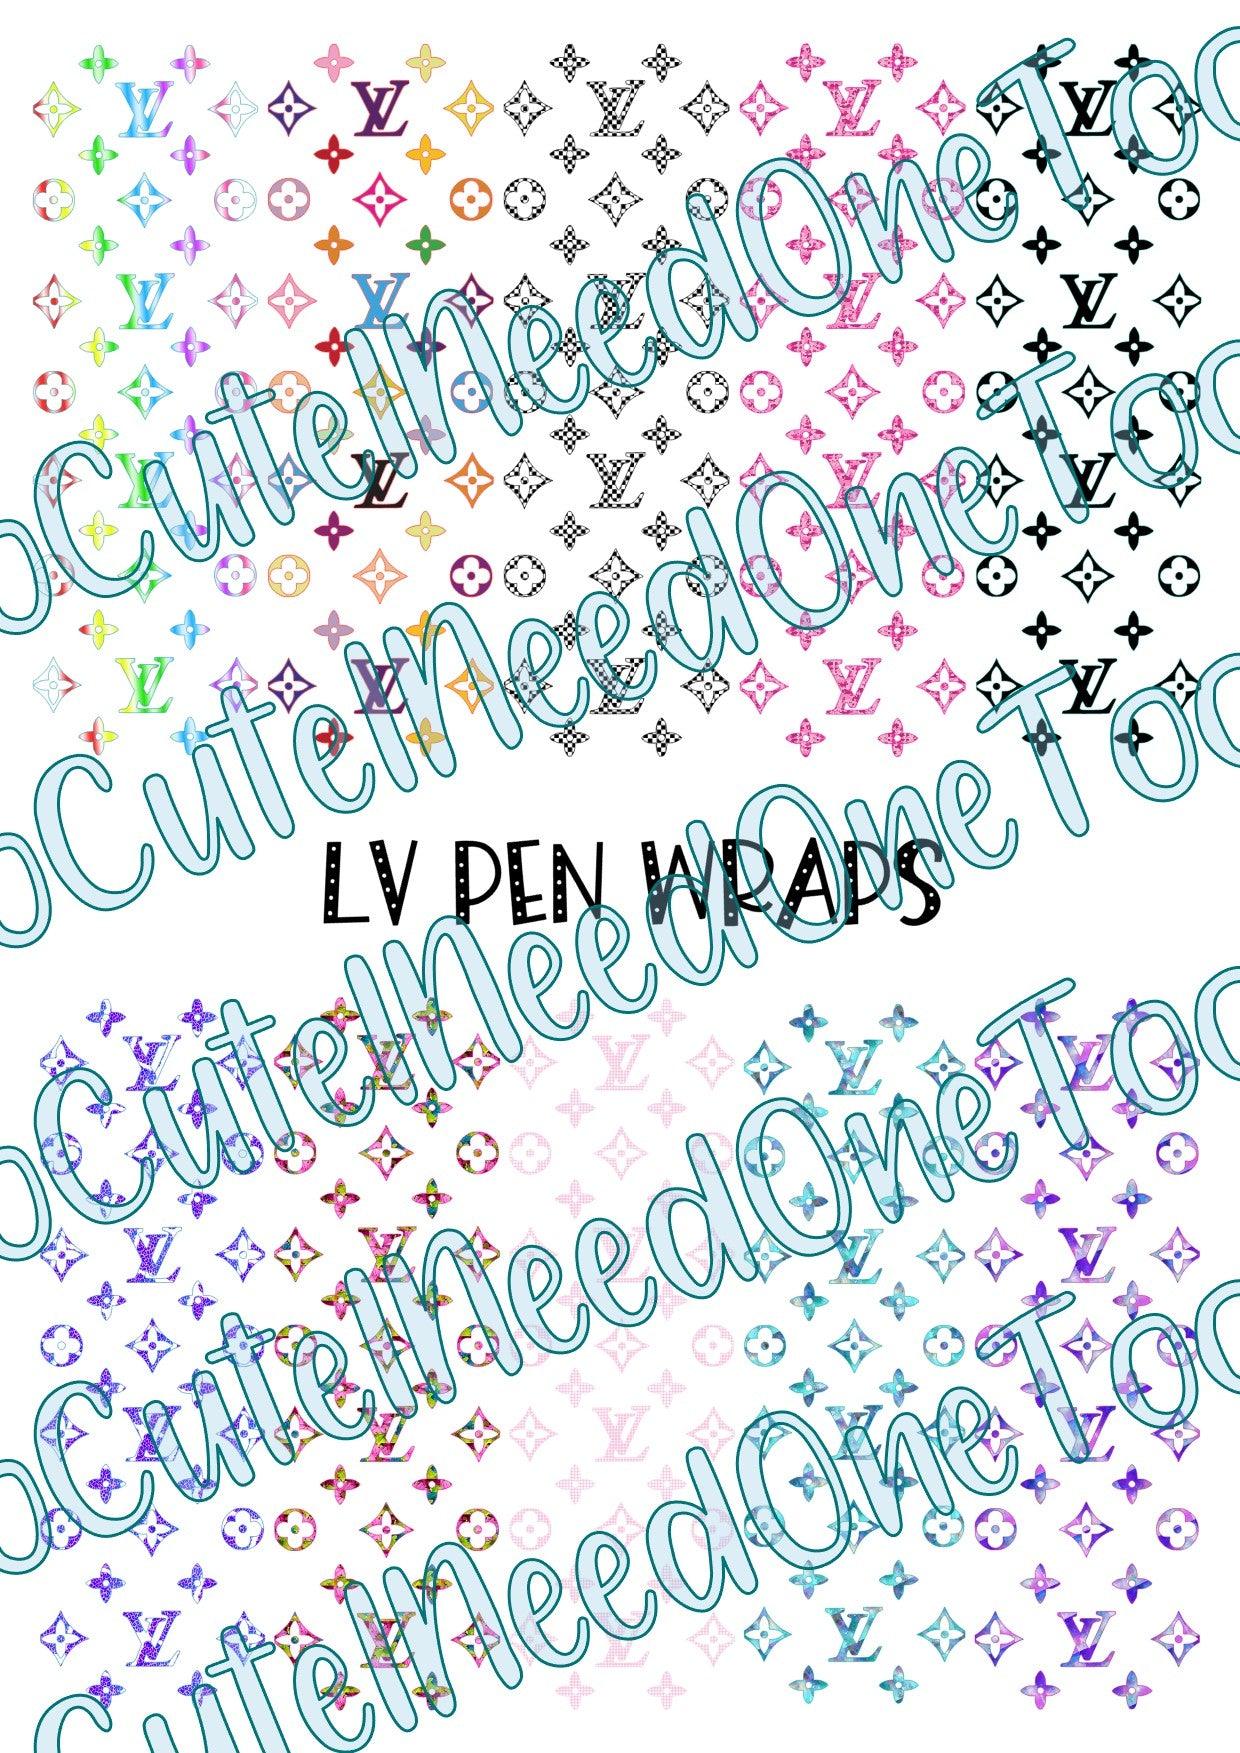 LV (Louis Vuitton) Pen Wraps - Clear/White Waterslide Paper Ready To Use